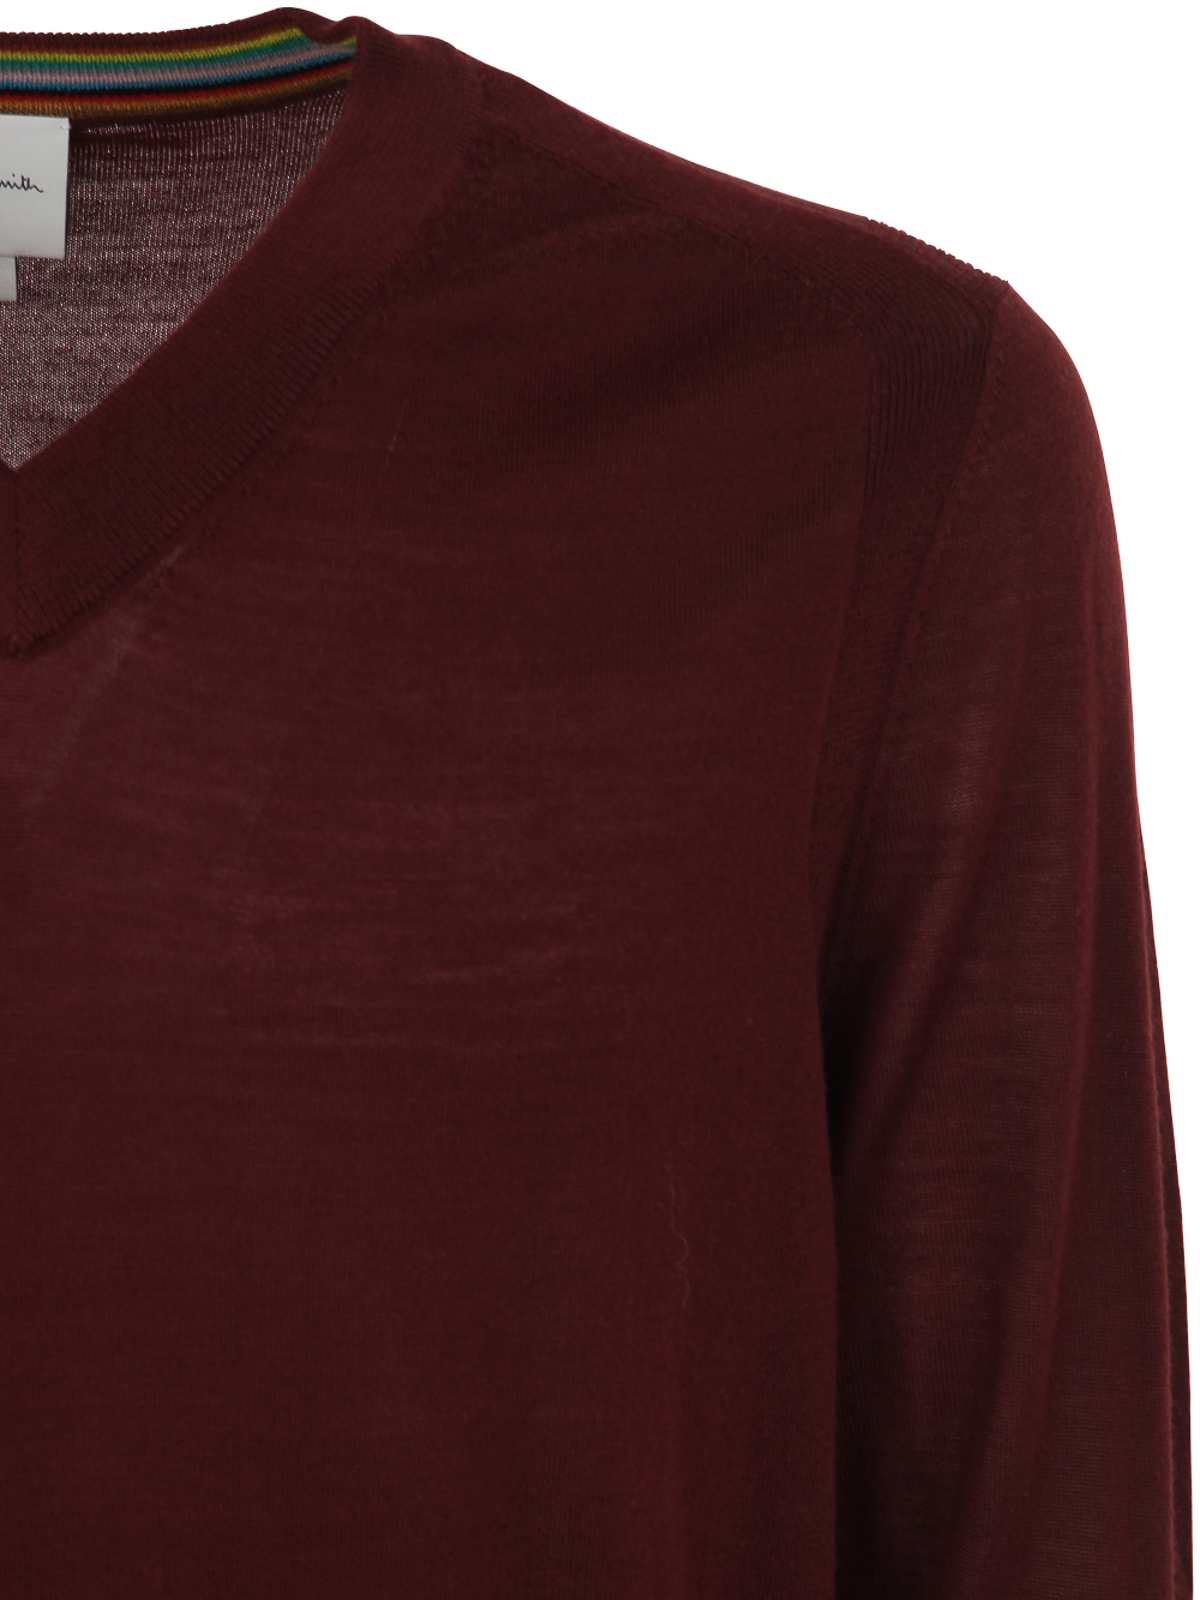 Shop Paul Smith Mens Sweater V Neck In Red